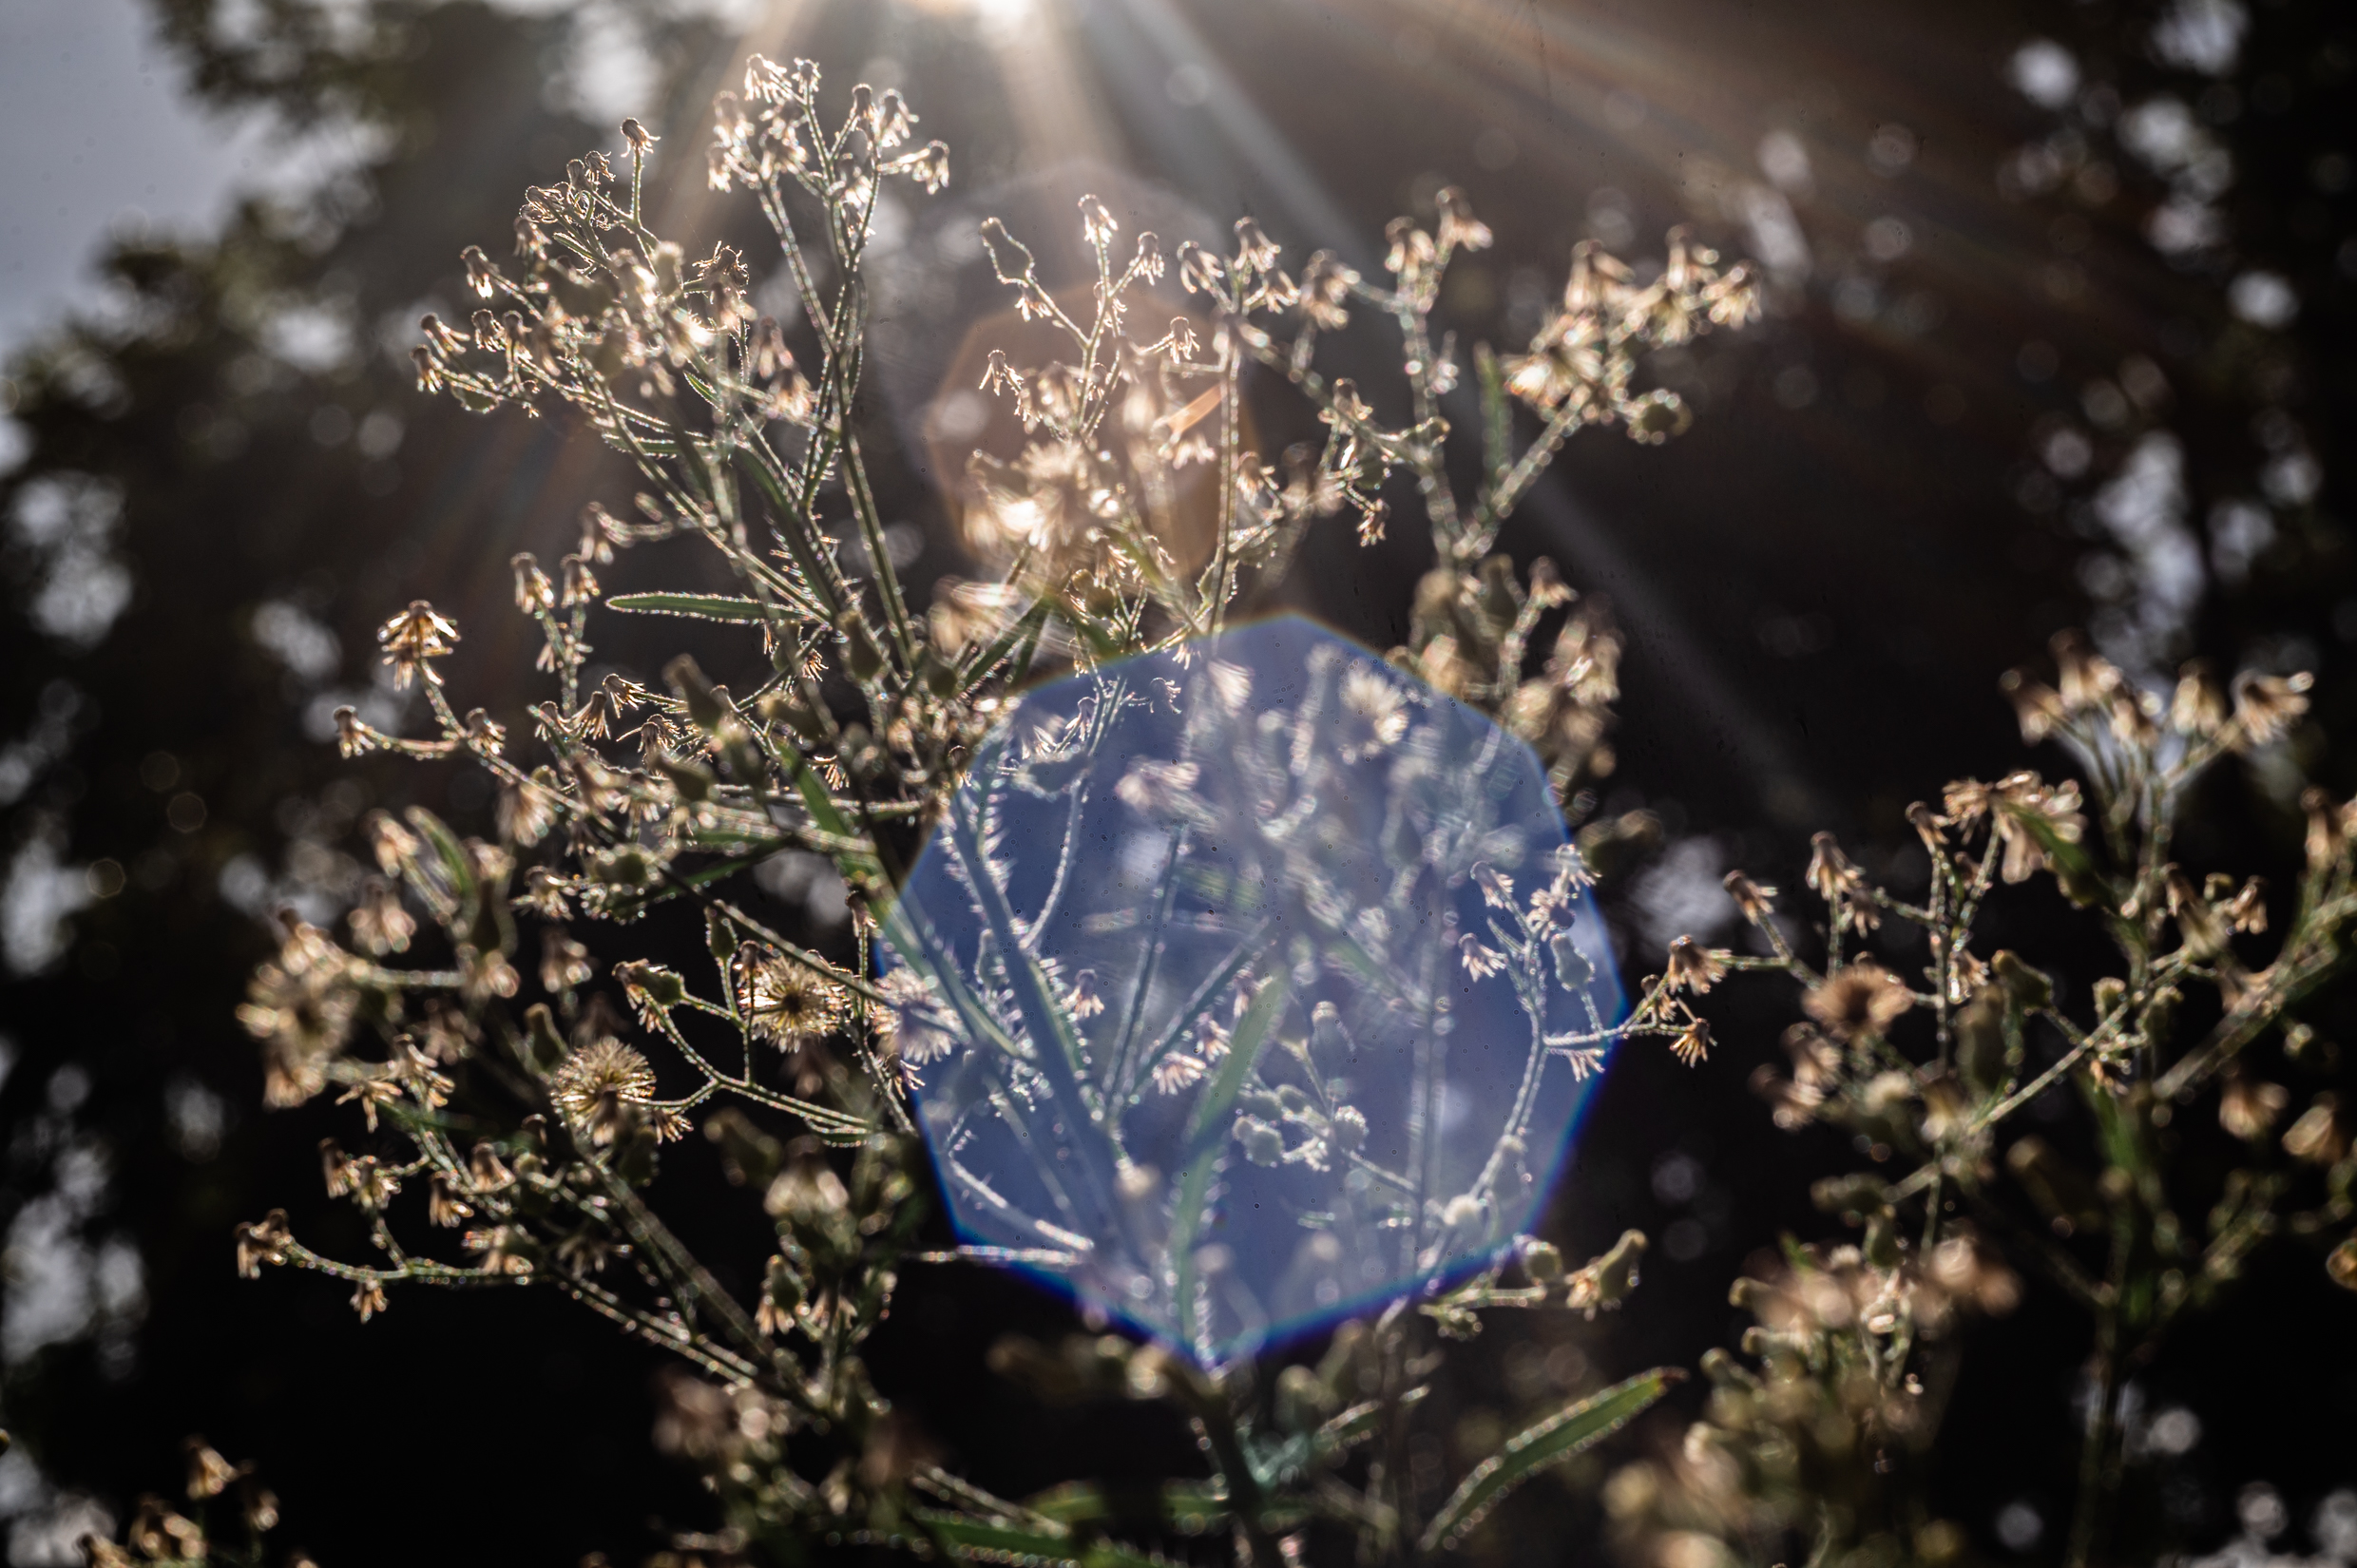 Creating with the helios 44-2 lens - flare behind florals